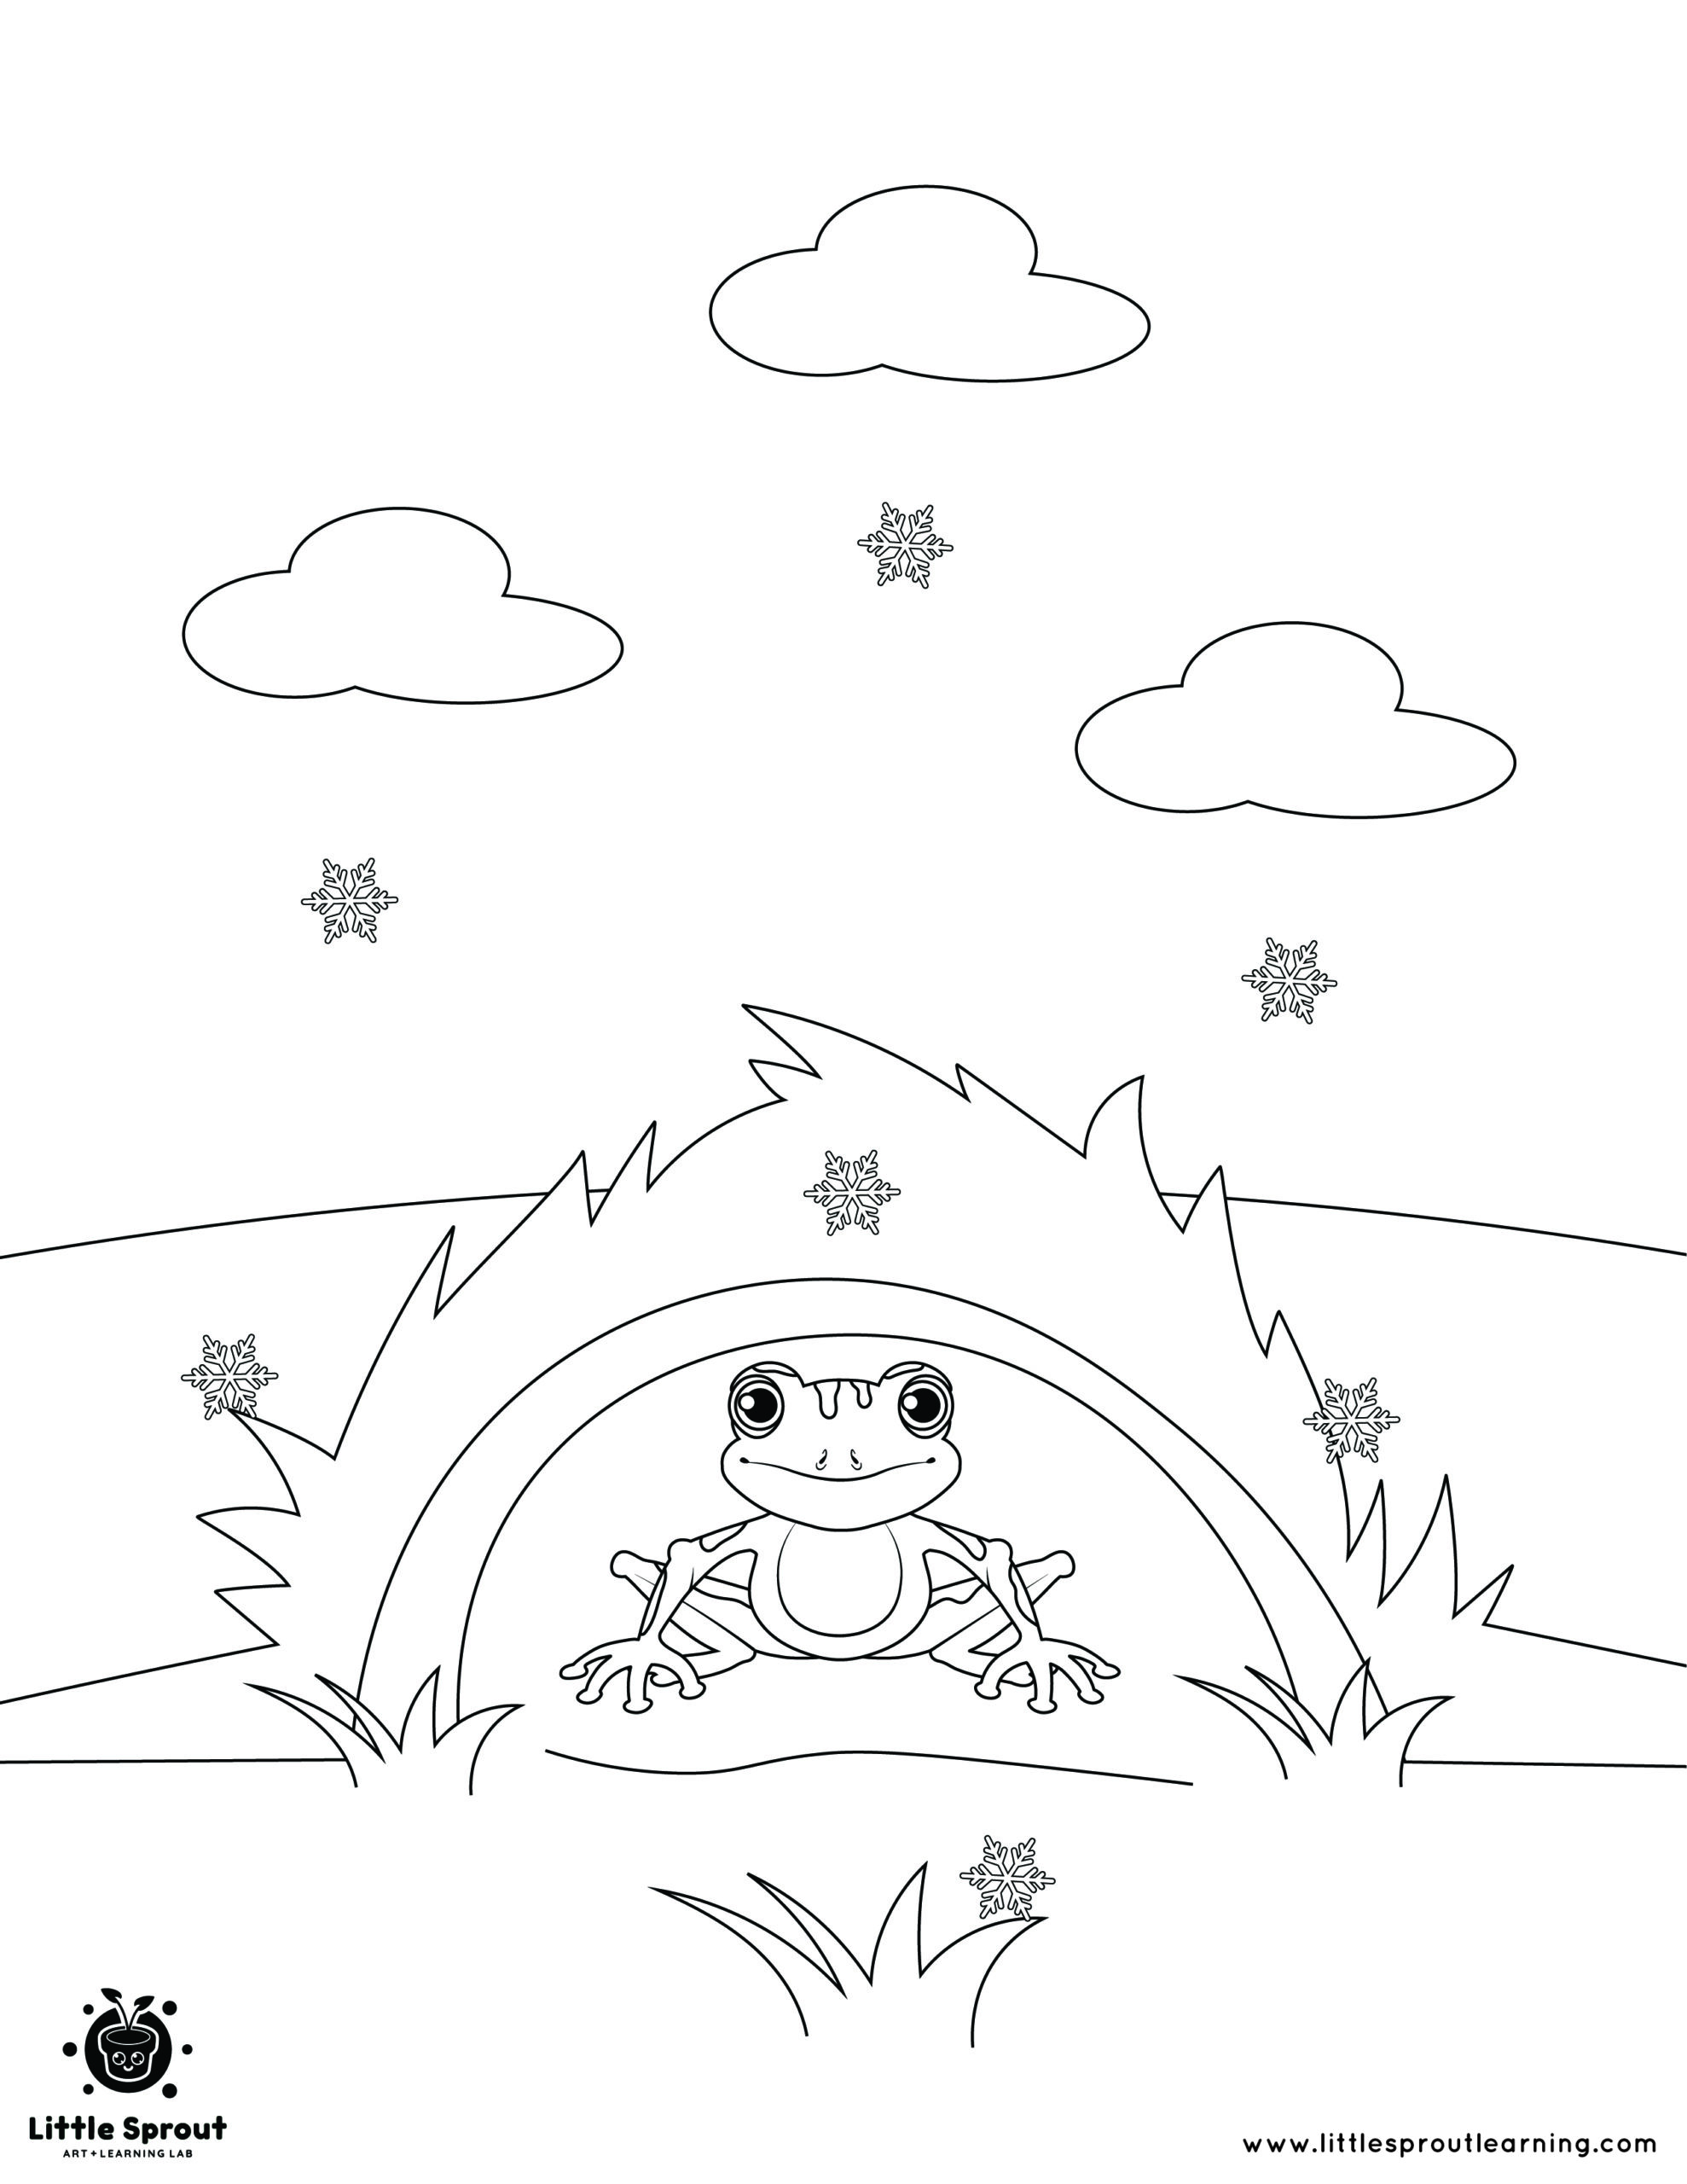 Wood Frog Coloring Page